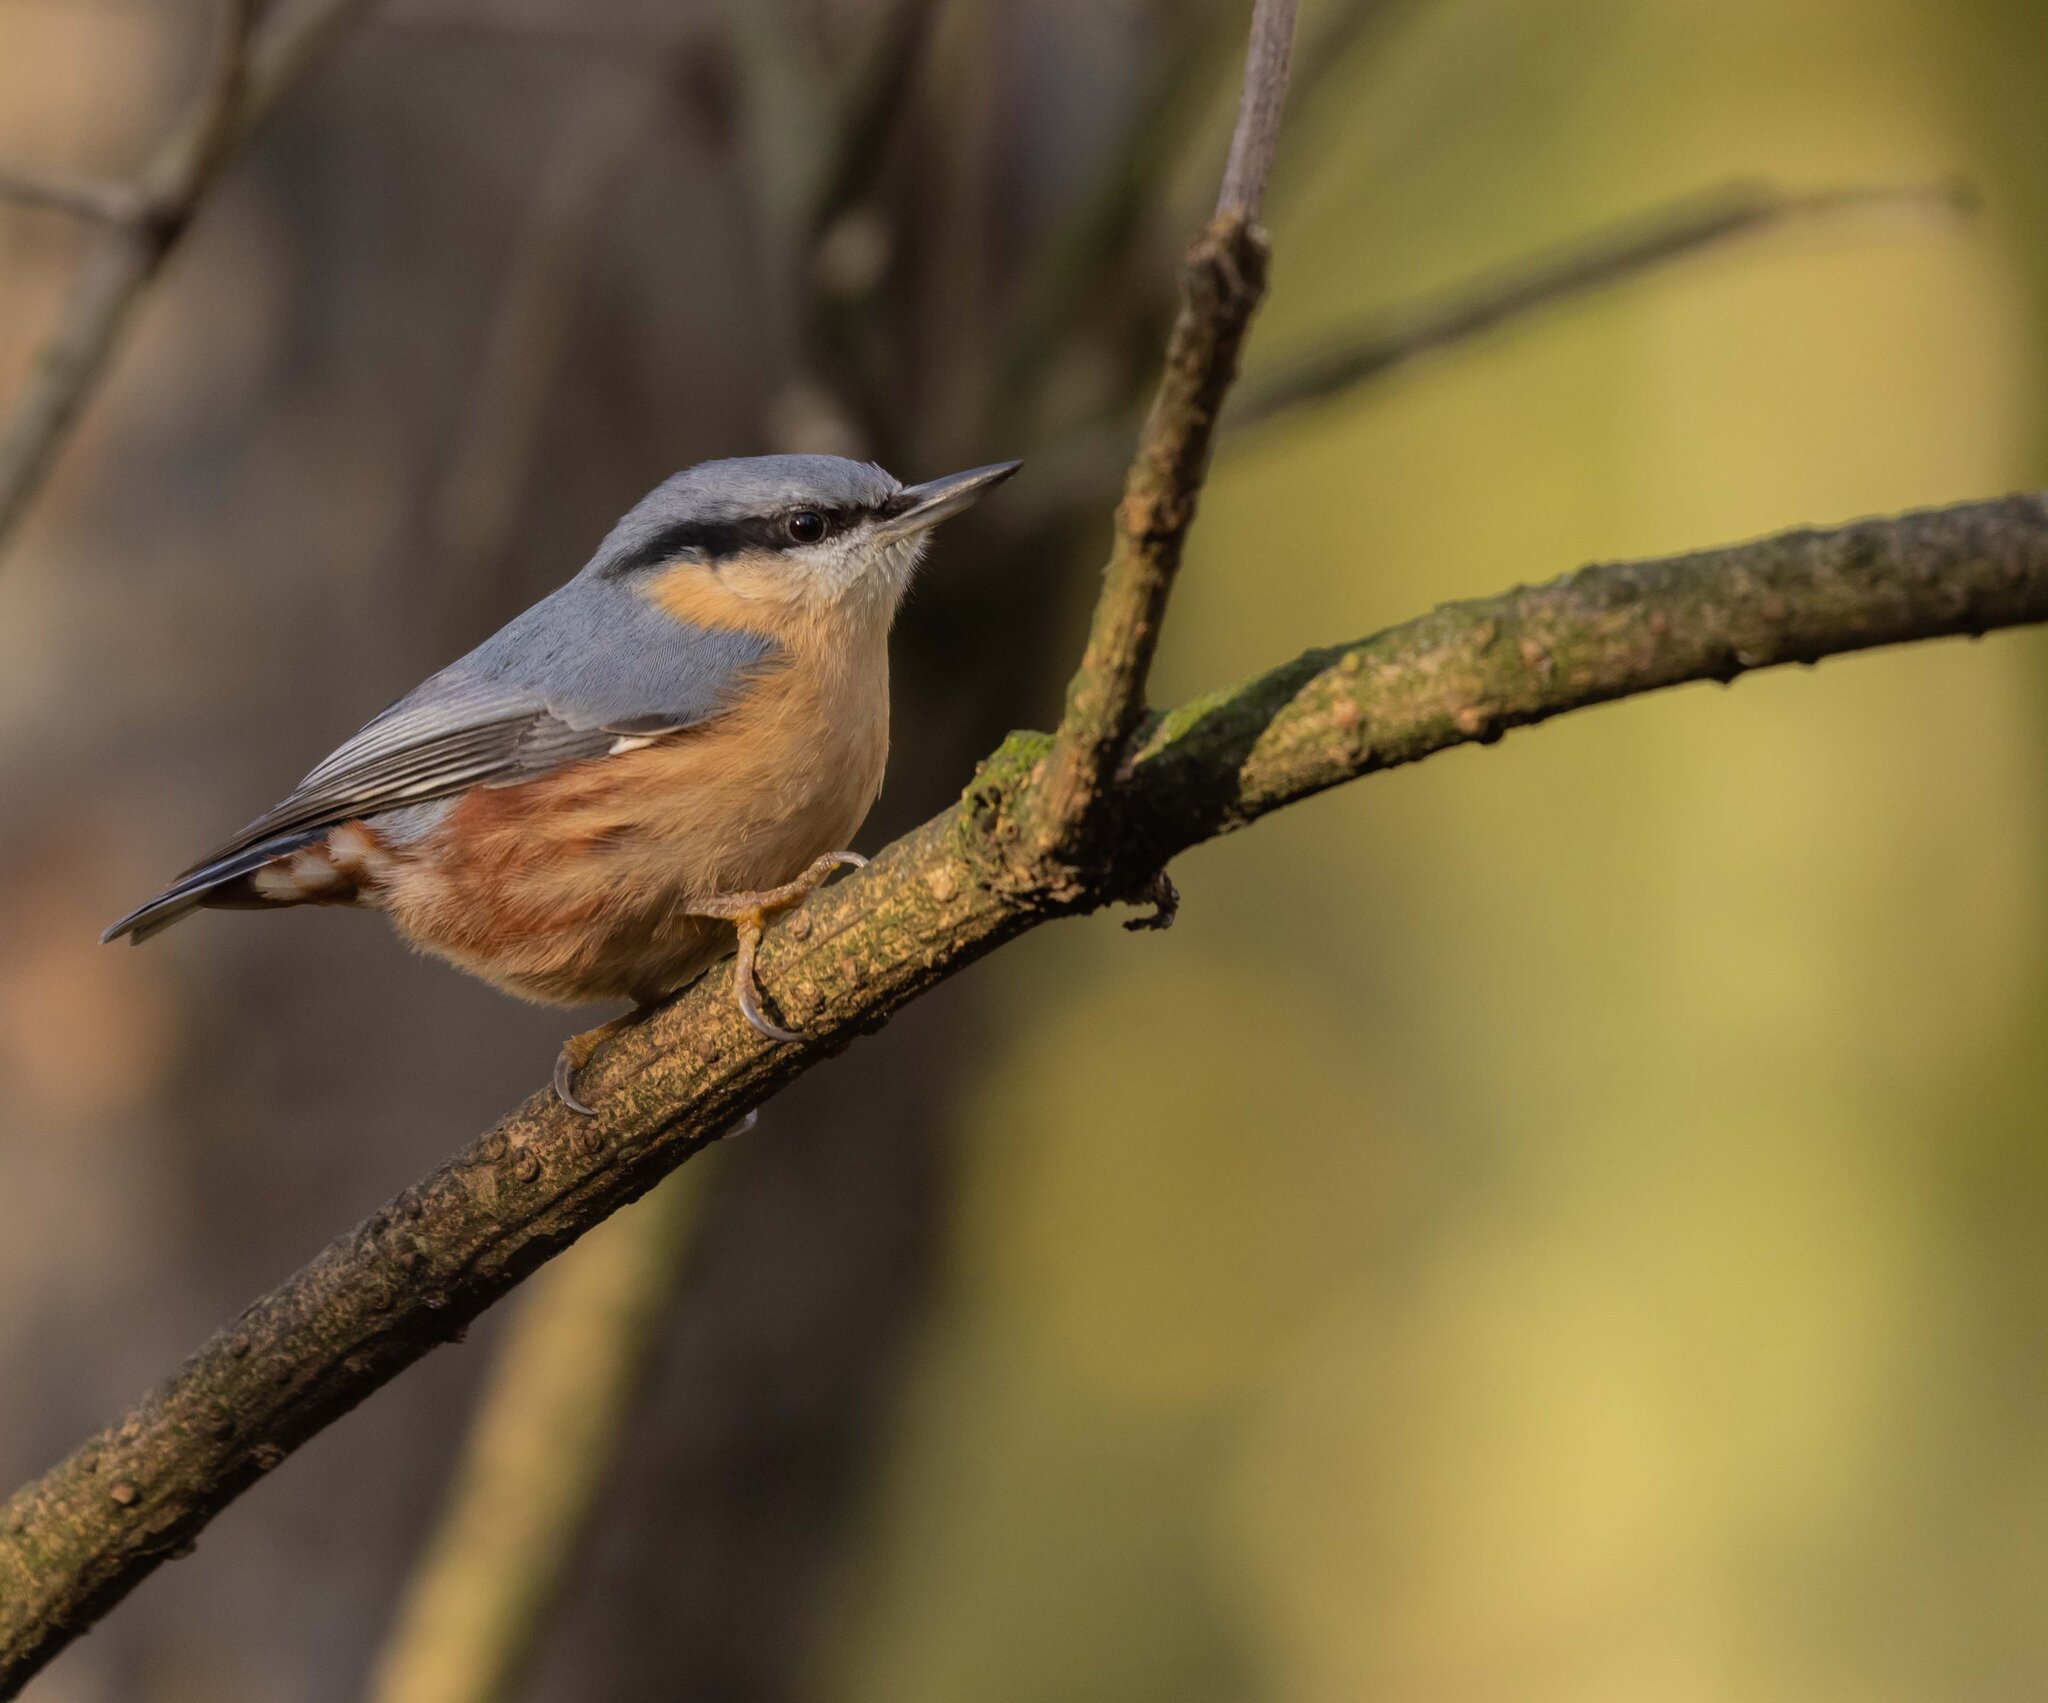 Nuthatch: Rufford Park, Nottinghamshire